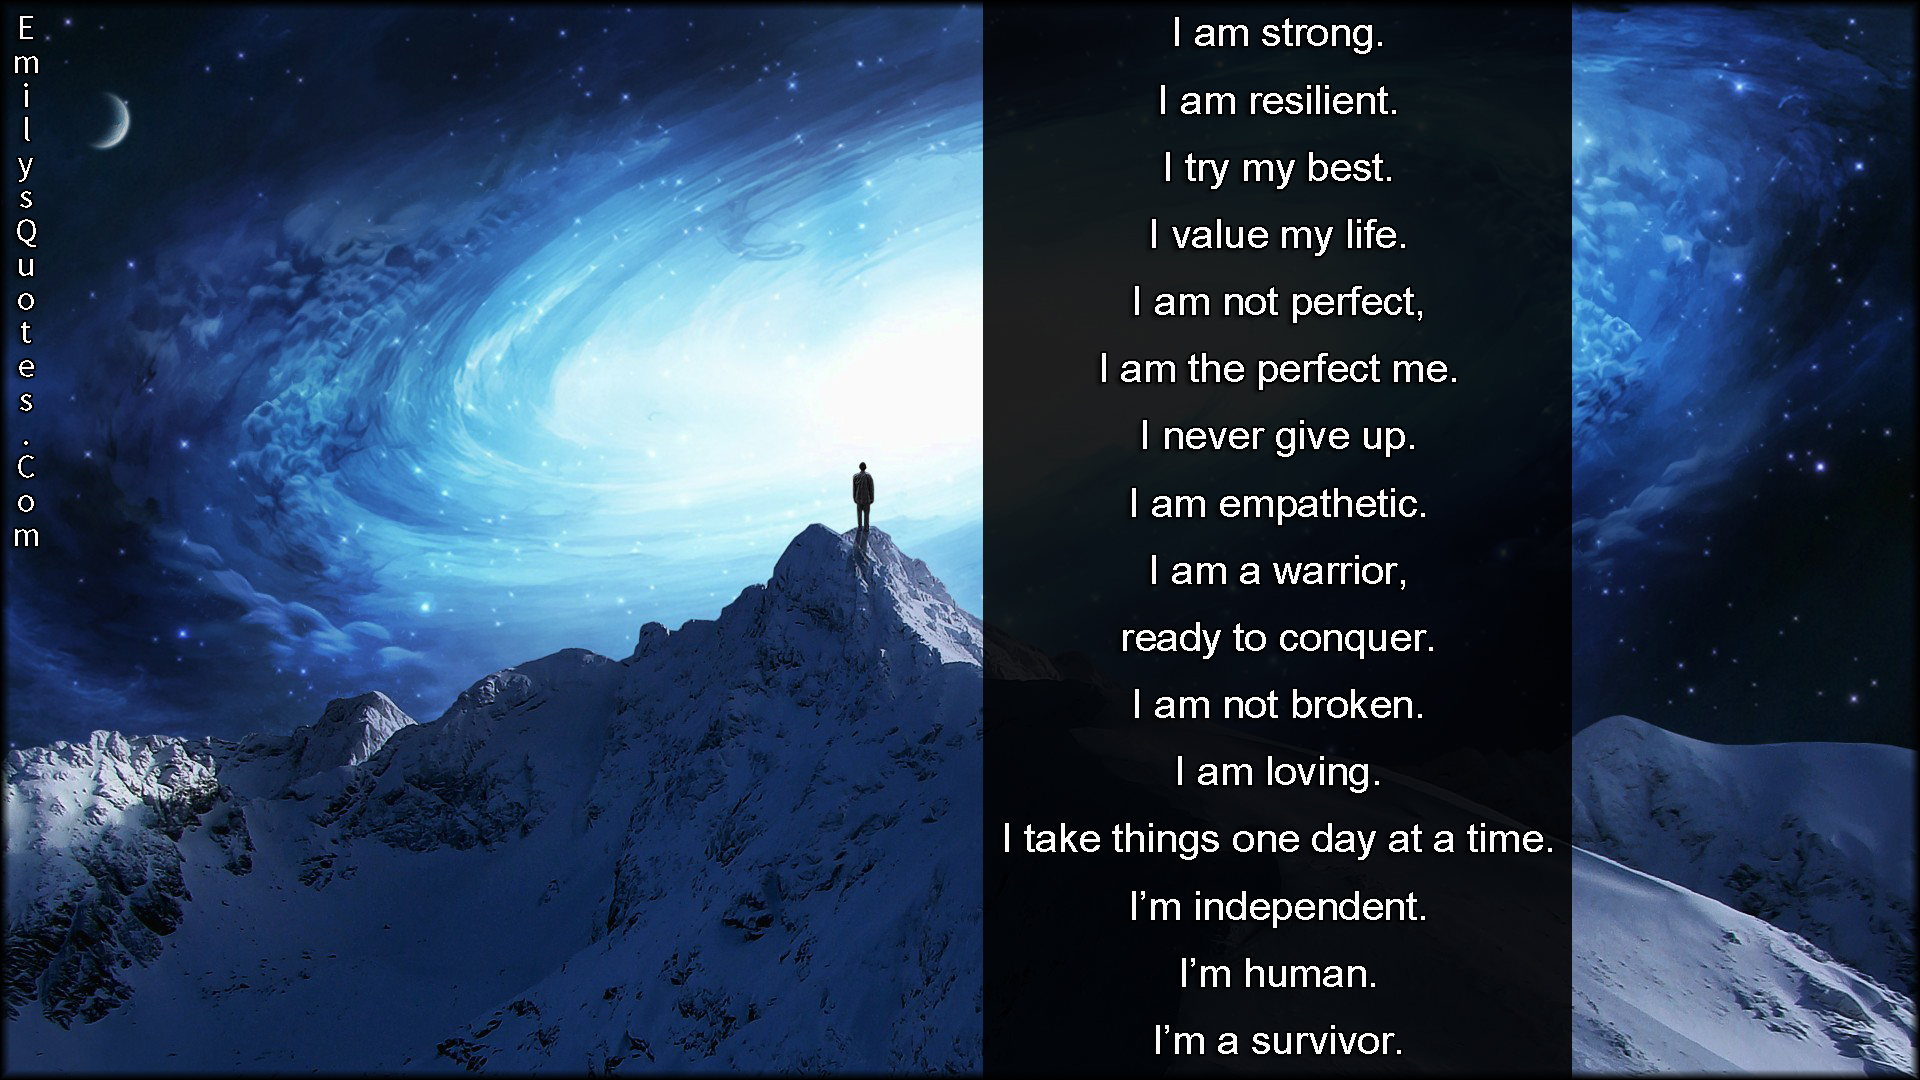 I Am Strong I Am Resilient I Try My Best I Value My Life I Am Not Perfect I Am The Perfect Me I Never Give Up I Am Empathetic I Am